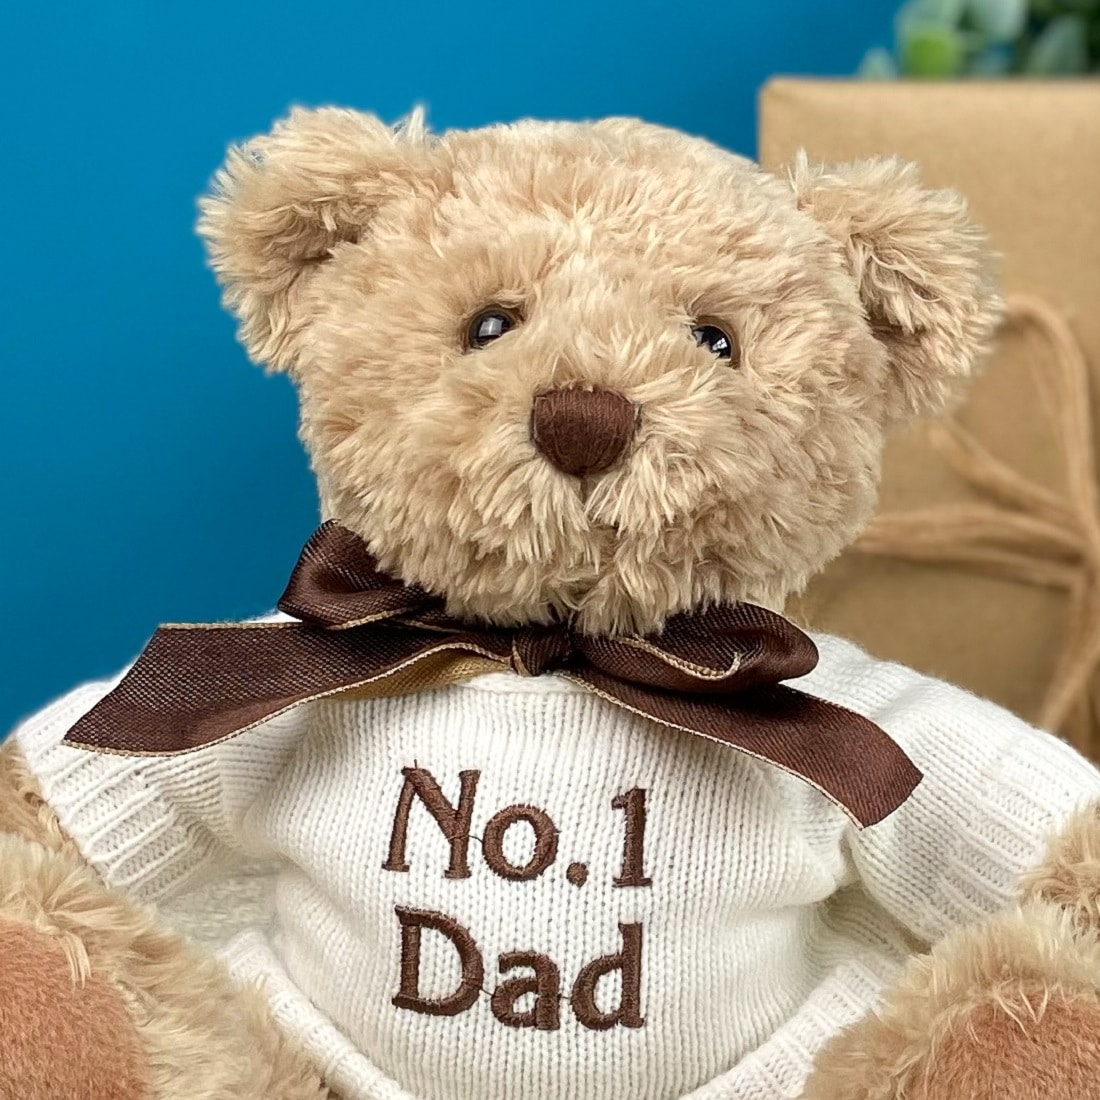 Father’s Day Keel sherwood large teddy bear soft toy personalised father's day gift